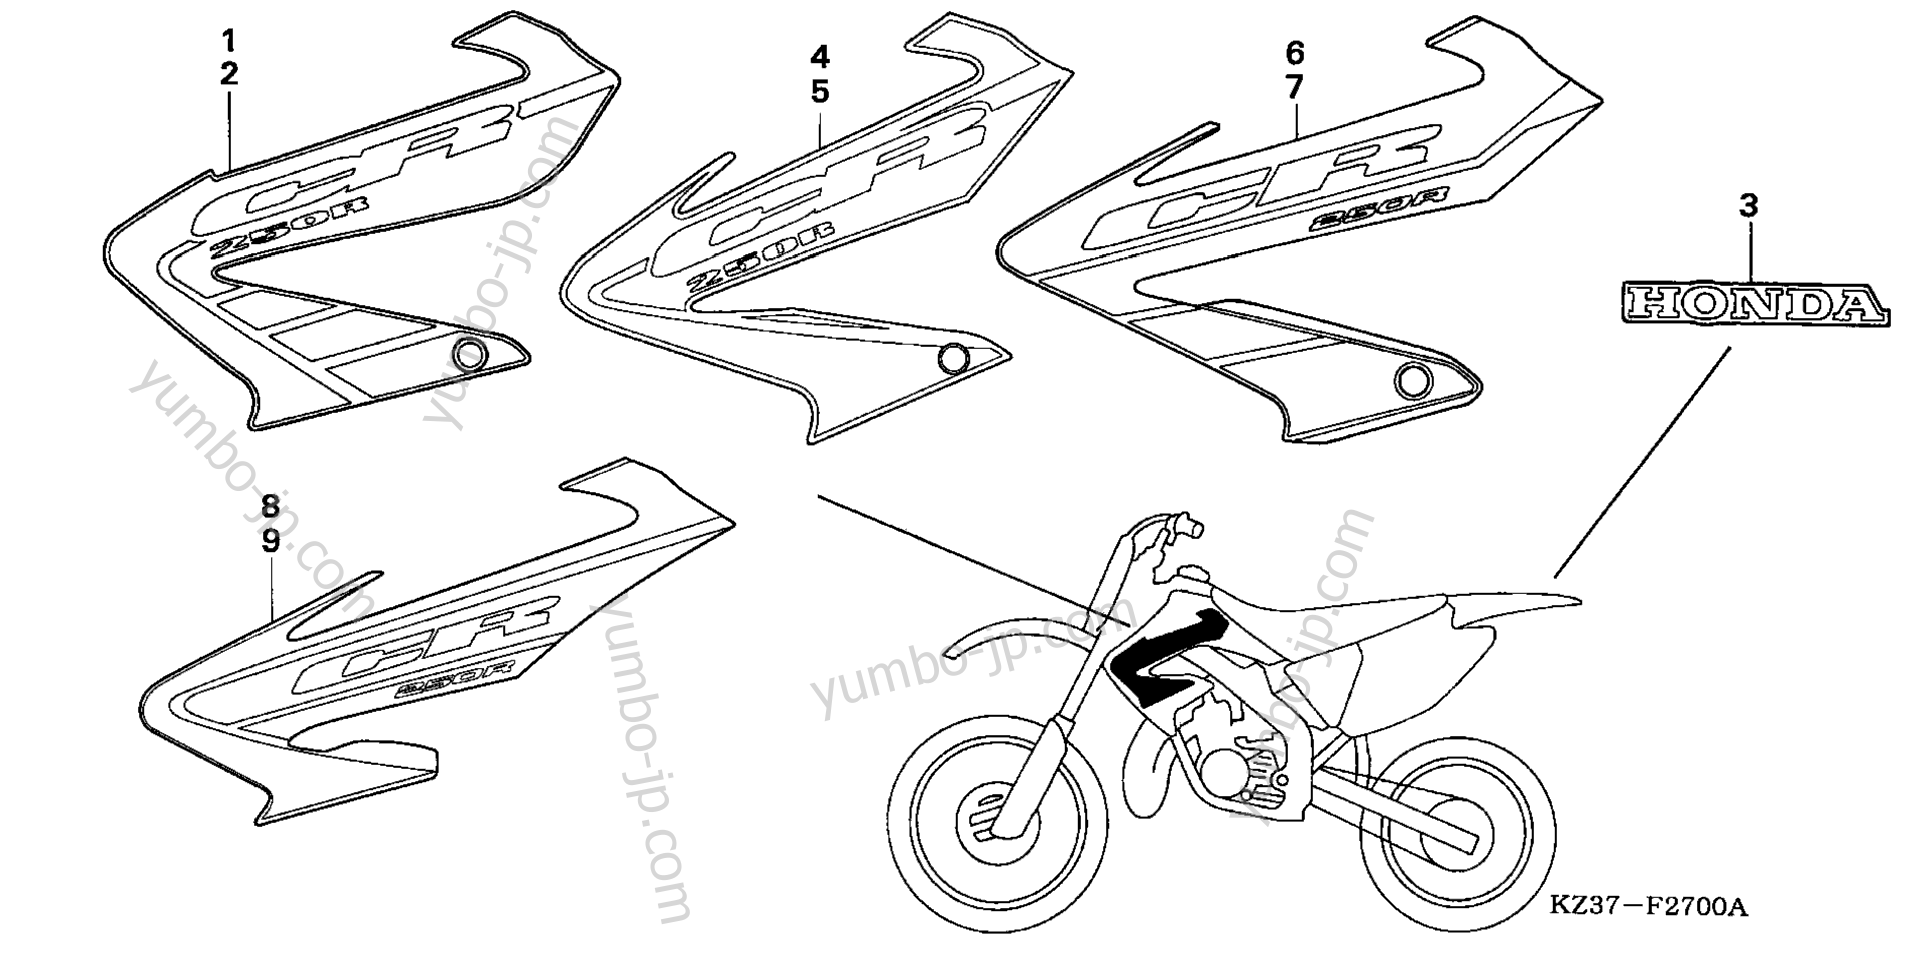 MARKS ('02-'05) for motorcycles HONDA CR250R A 2004 year